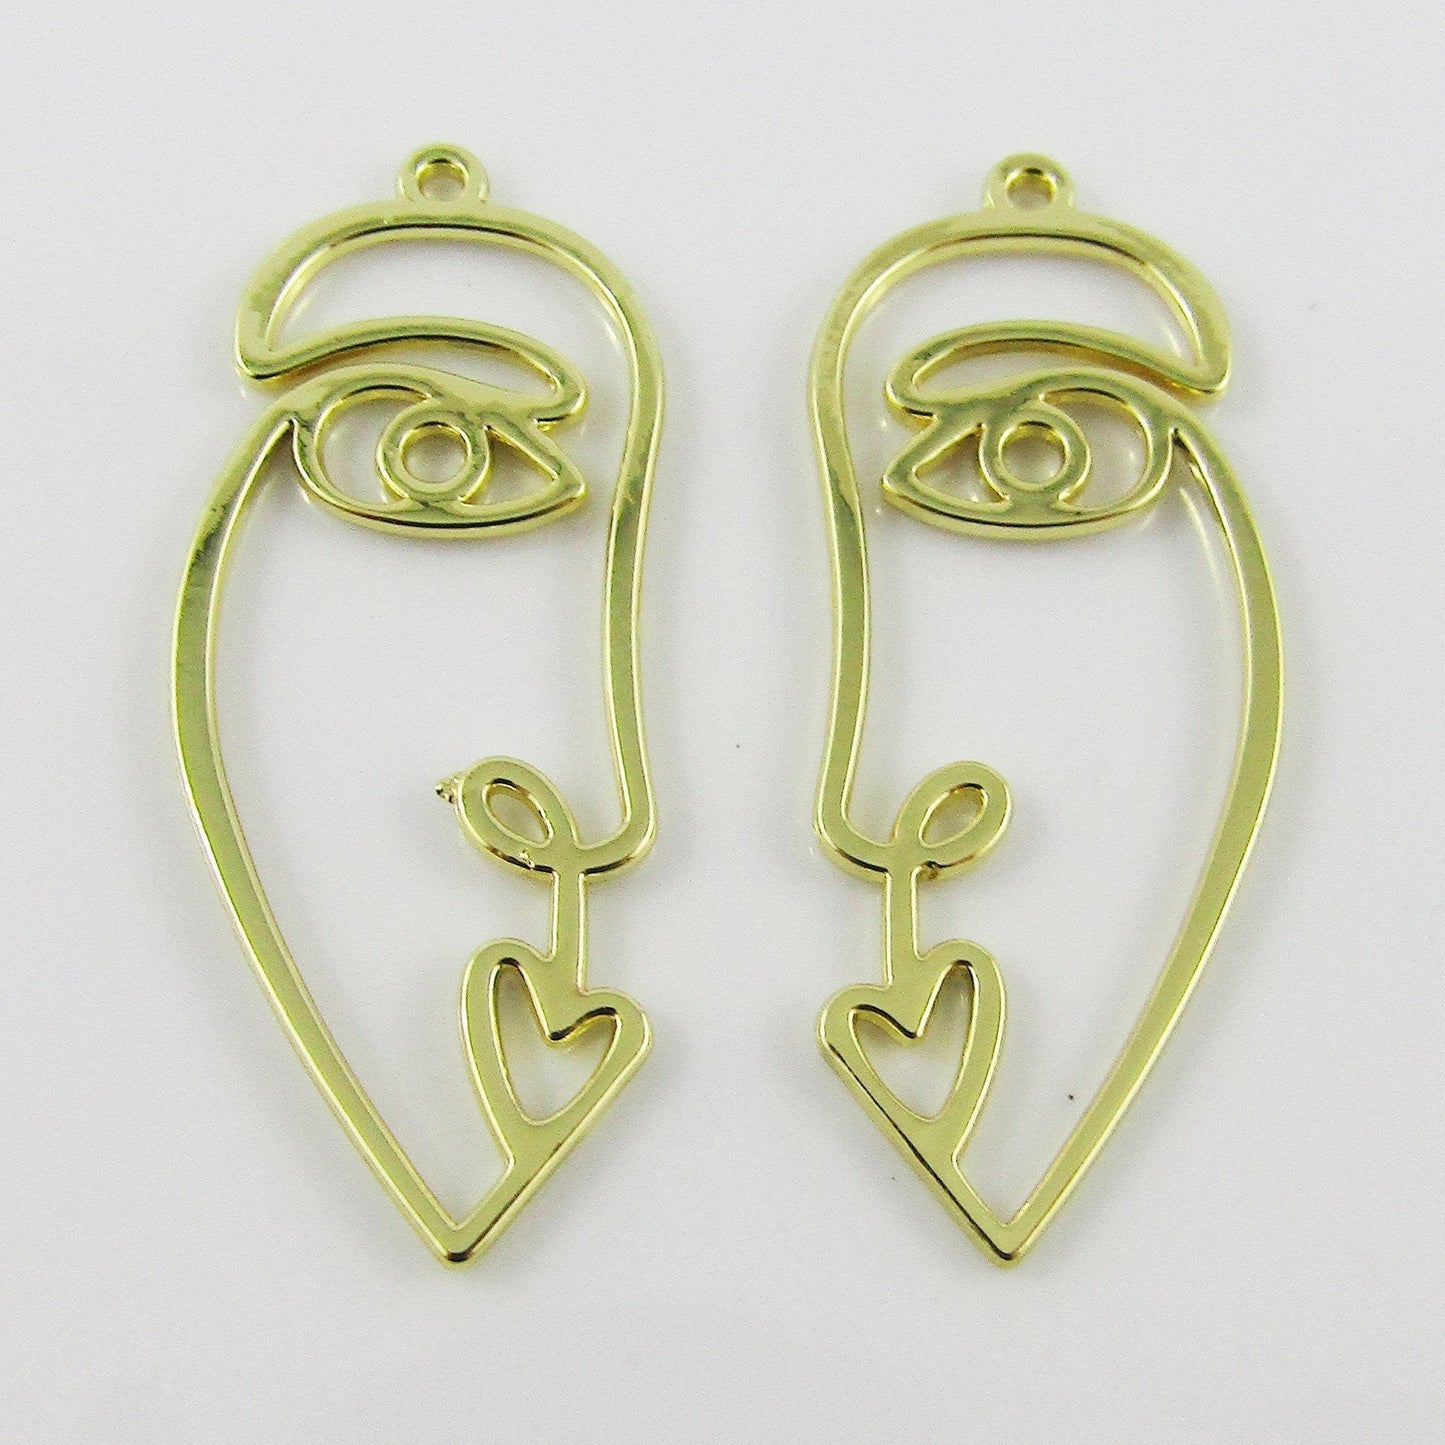 6pcs Abstract Face Picasso Charm Pendant Gold Plate 40x16mm Open Bezel